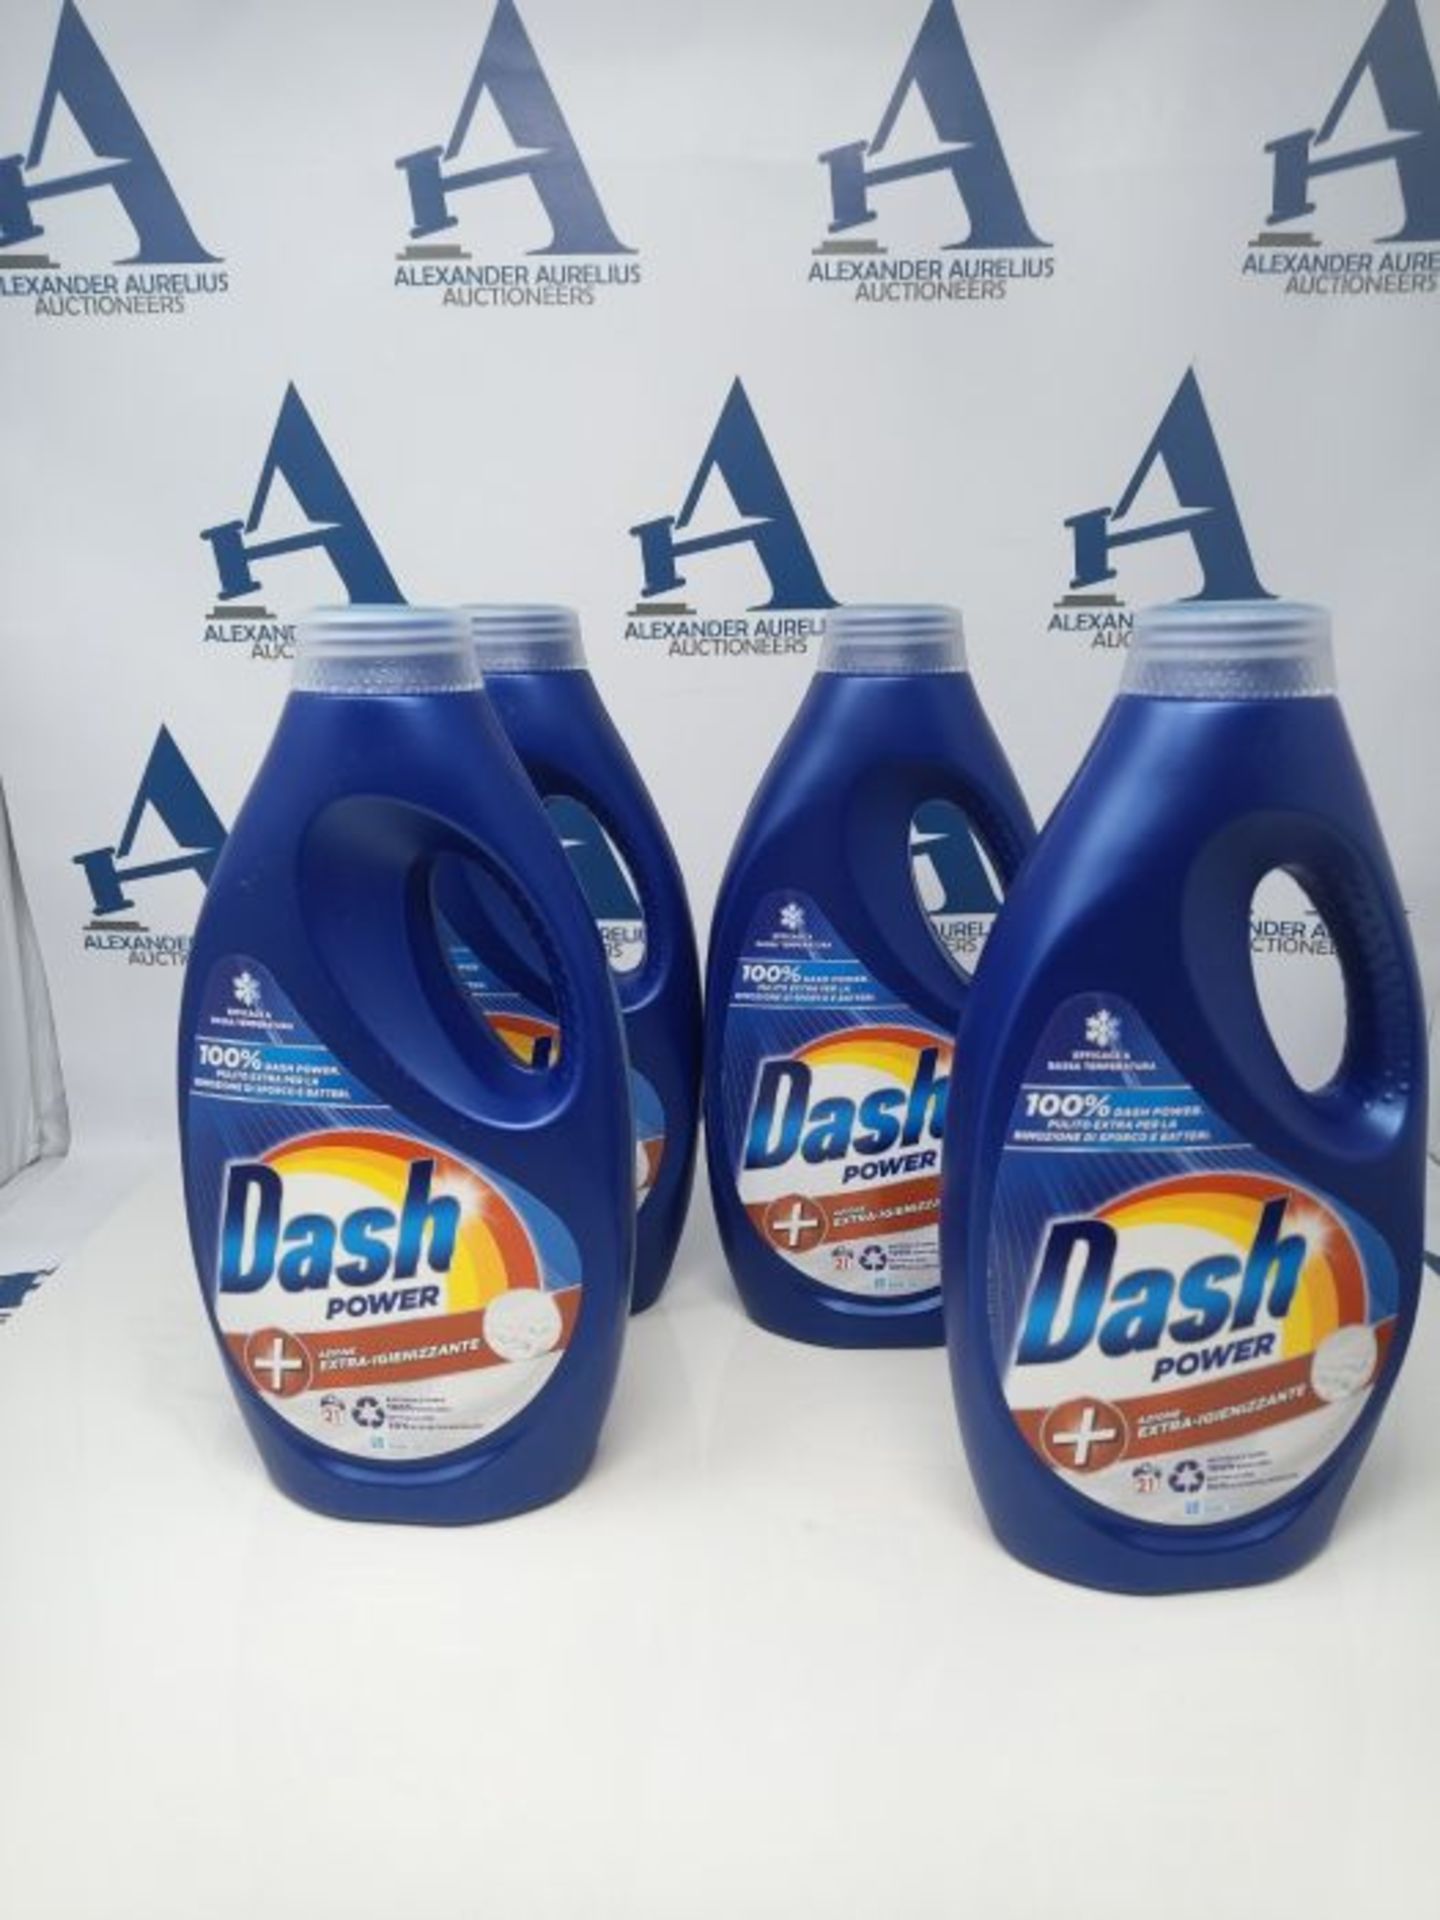 Dash Liquid Washing Detergent, 84 Washes (4 x 21), Extra-Sanitizing Action, Deep Clean - Image 2 of 3